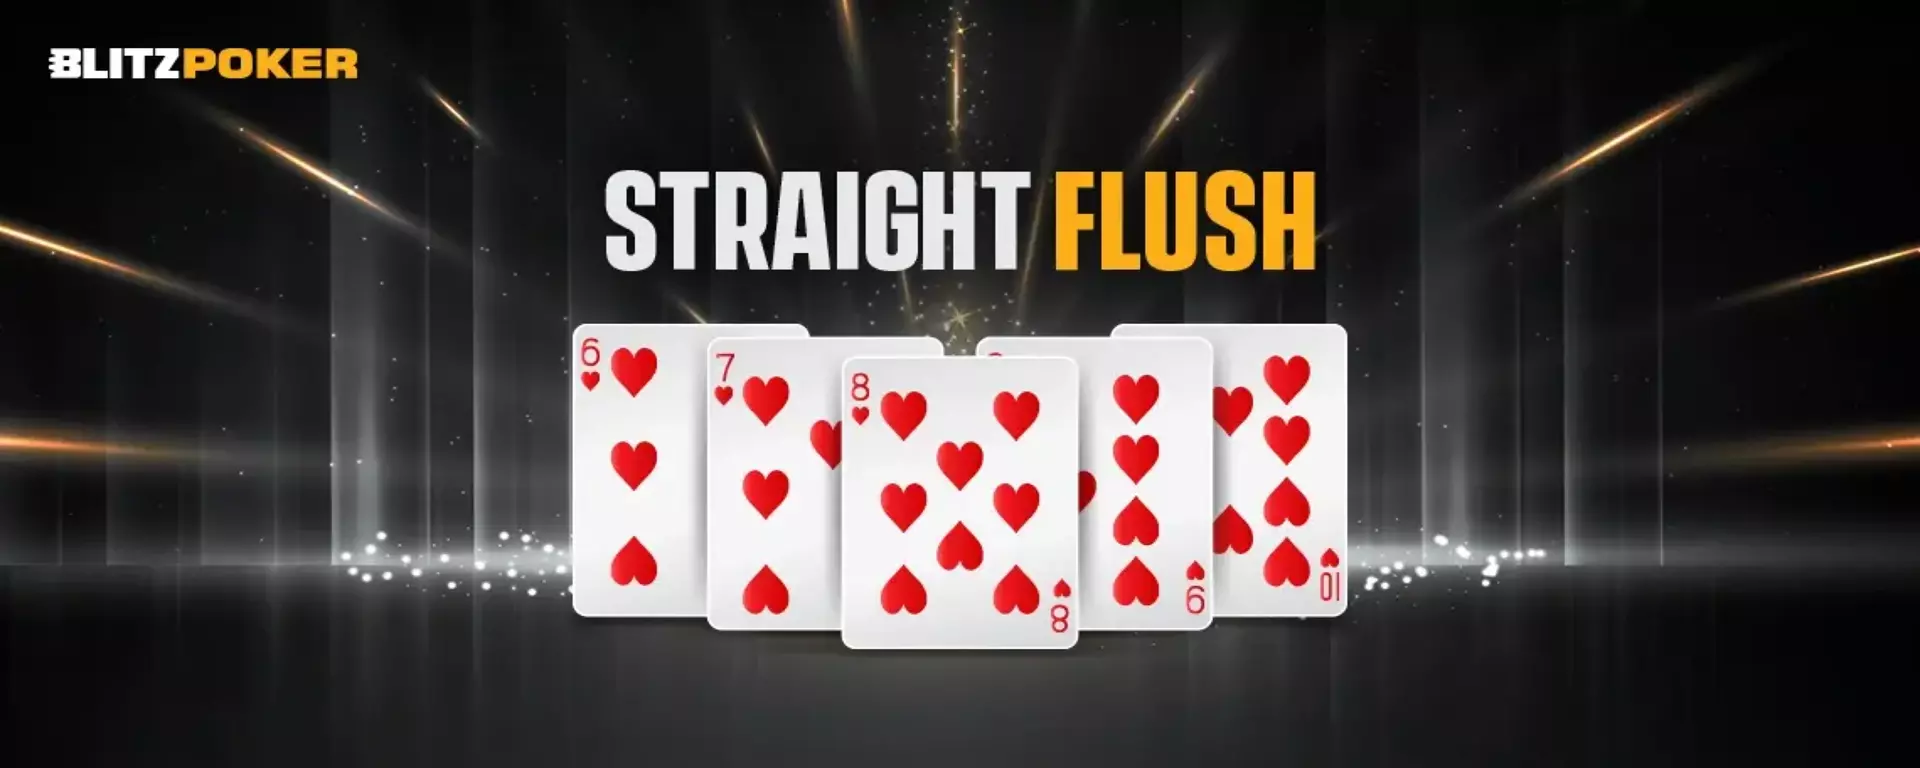 Straight Flush in Cards